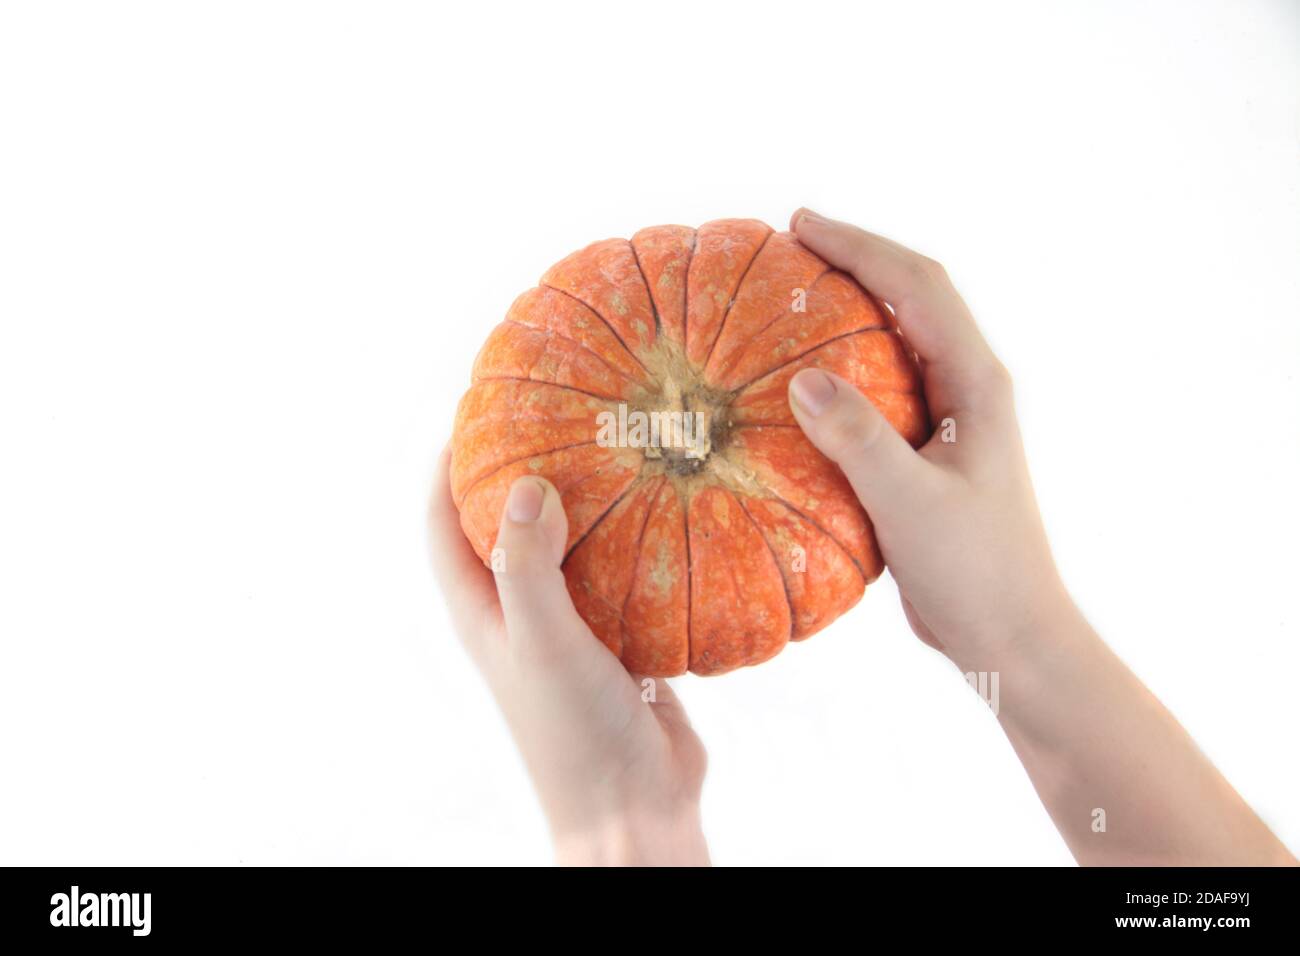 kids hands holding a pumpkin isolated on white backgroud flat lay. Healthy eating concept. Image contains copy space Stock Photo